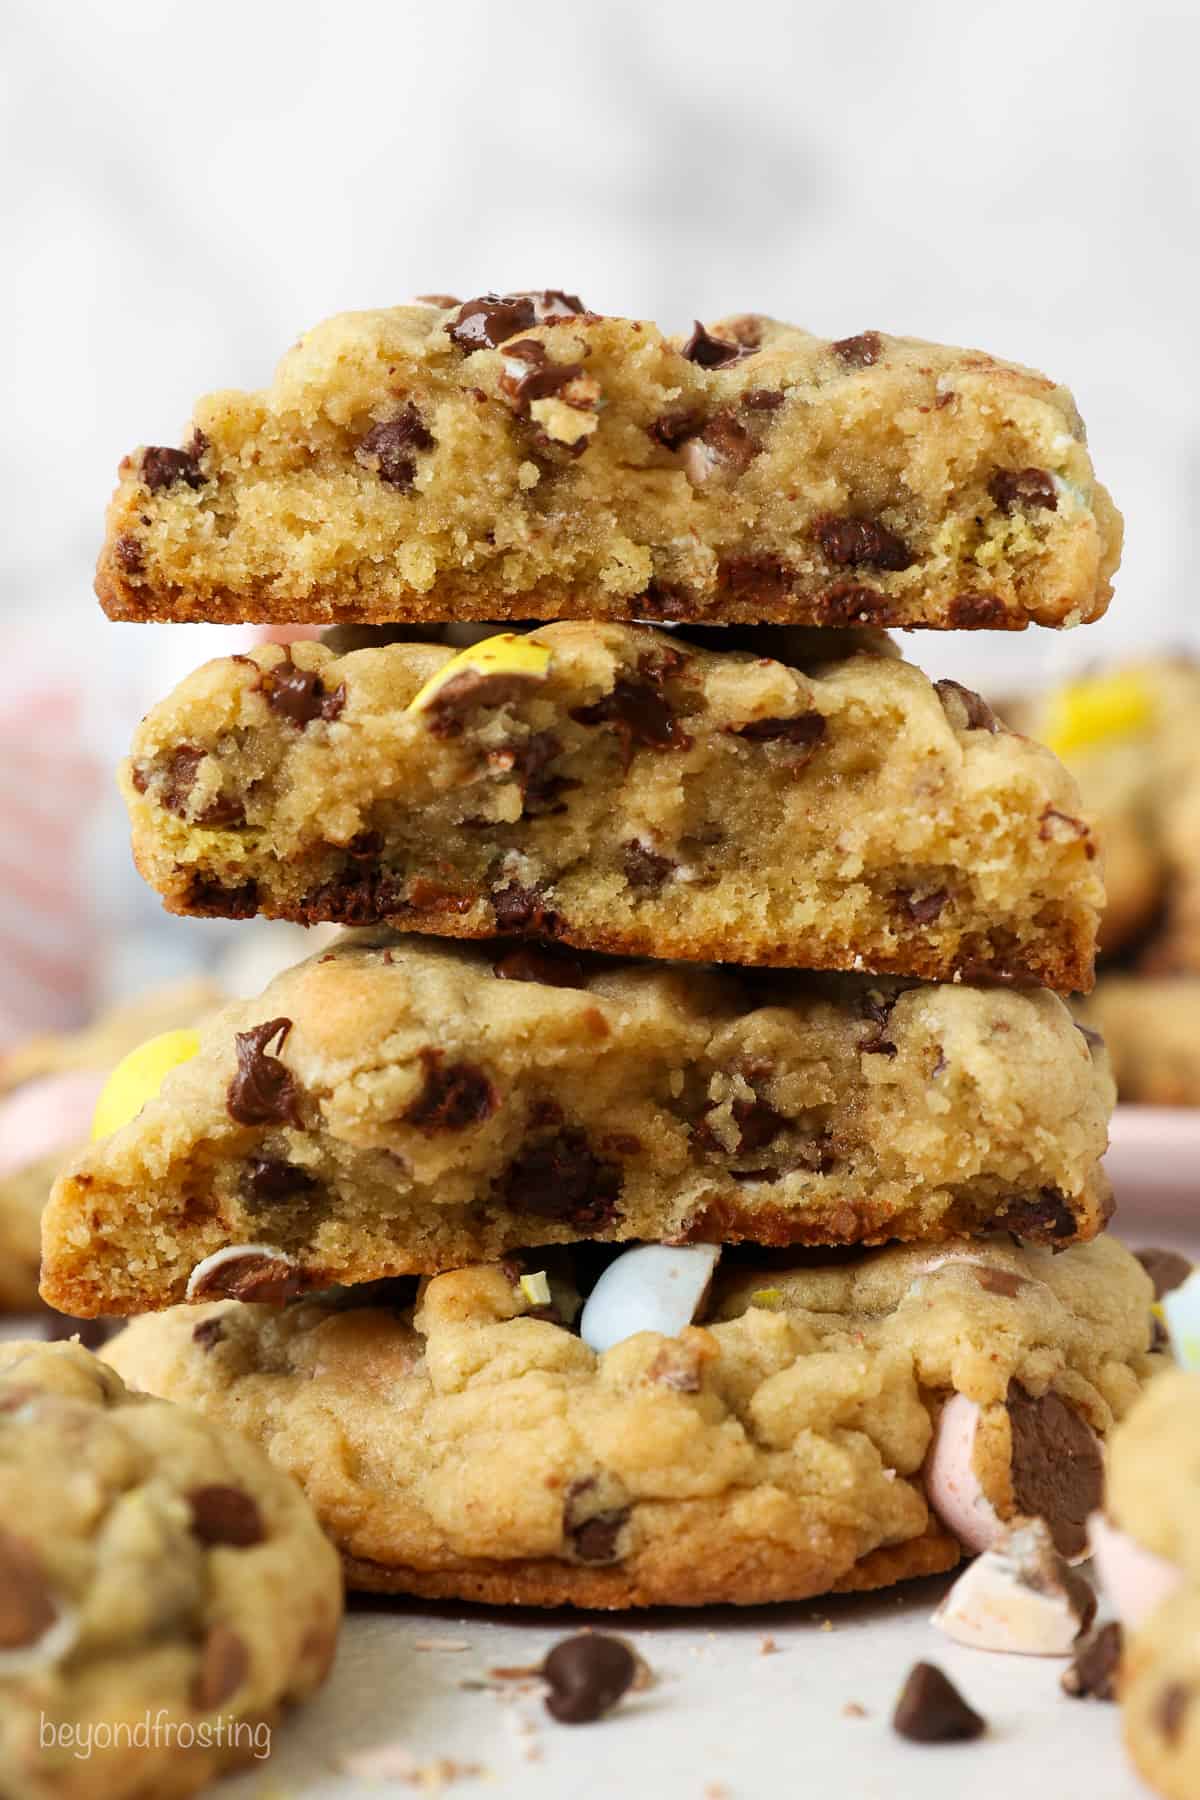 A stack of broken chocolate chip cookies showing you the inside of the cookie